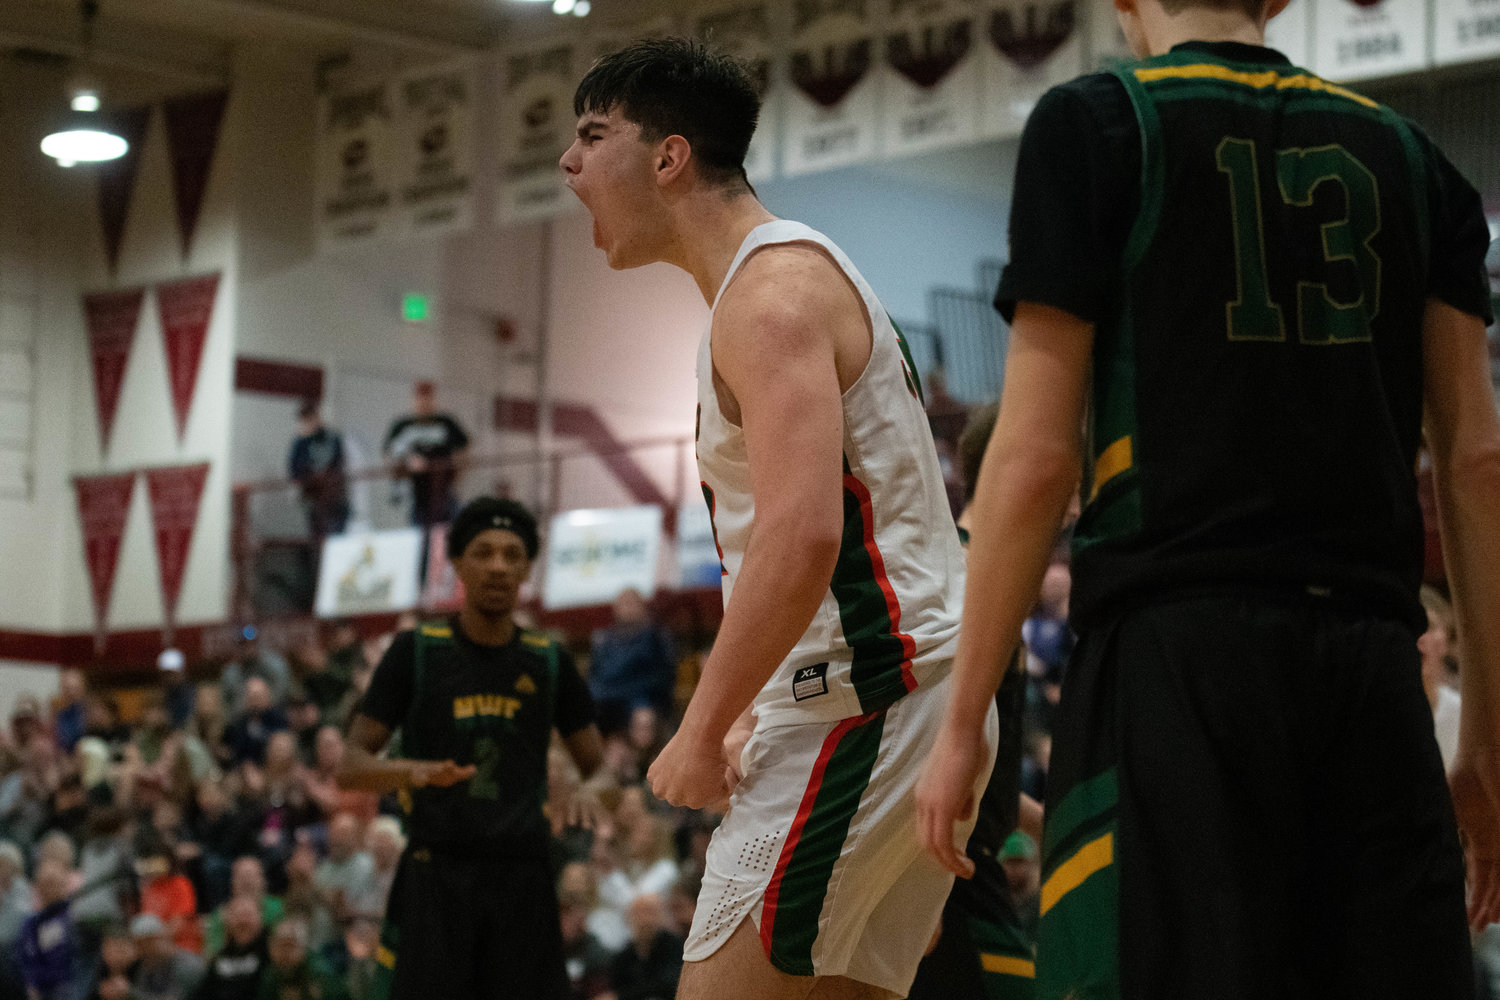 Josh Salguero lets out a yell after making a bucket through contact during MWP's opening-round win over Northwest Christian in the 2B State basketball tournament on Feb. 25 in Chehalis.